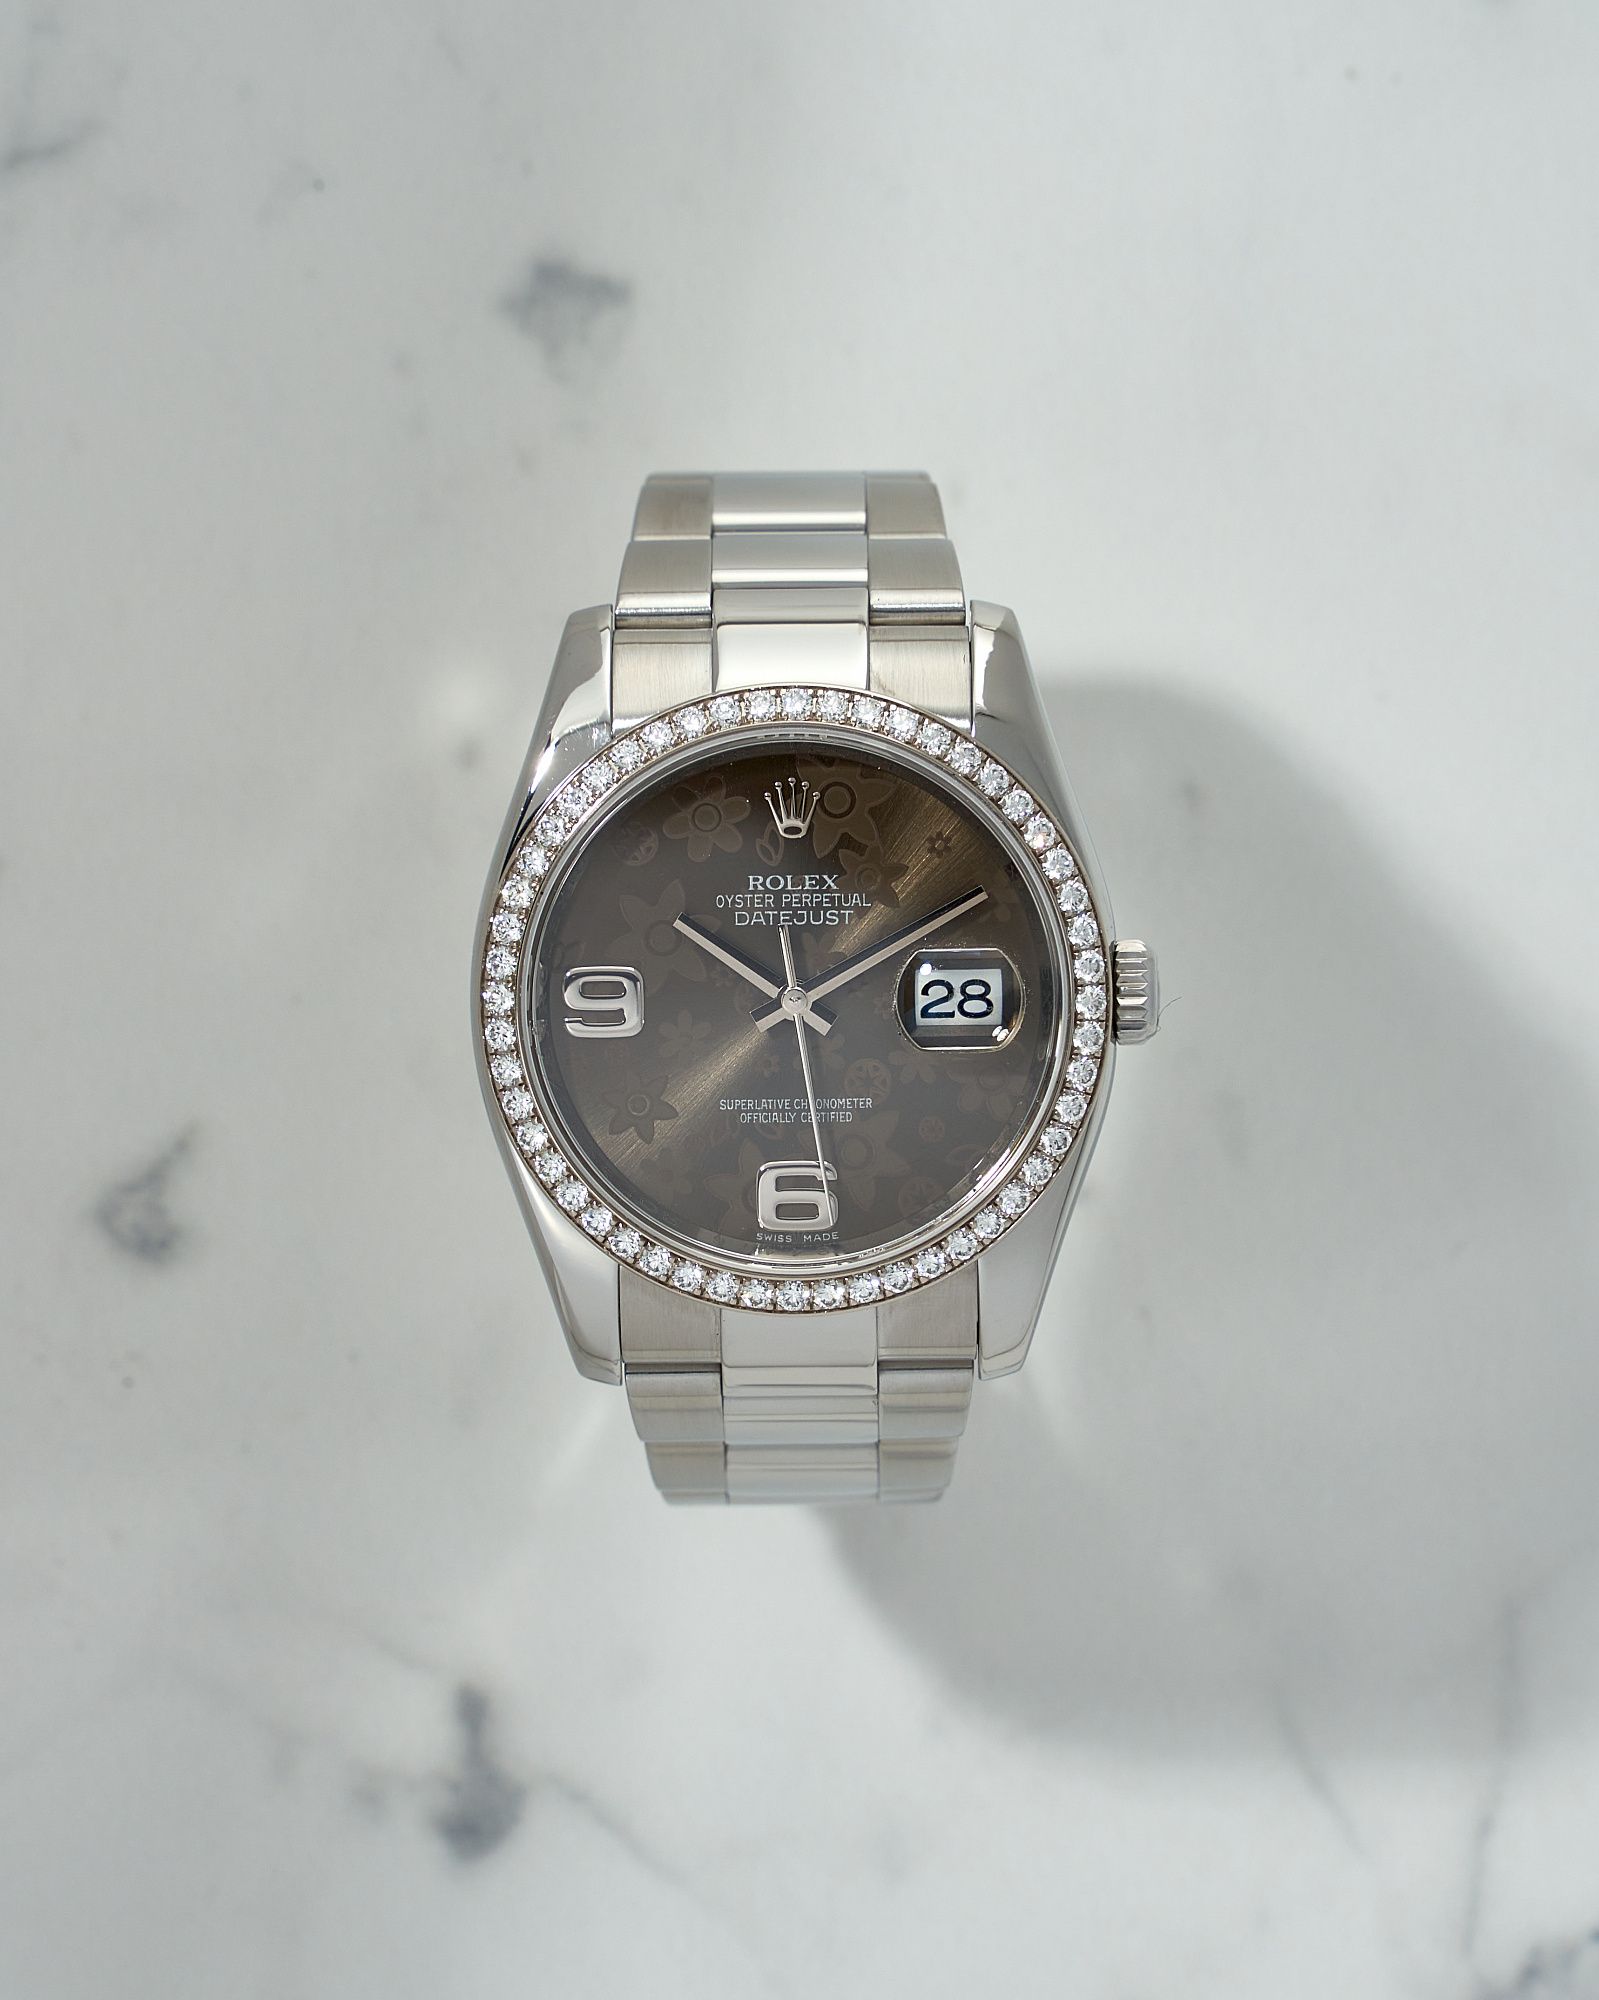 Rolex Oyster Perpetual Datejust 36mm Diamond & Floral Dial with papers 2013 Year